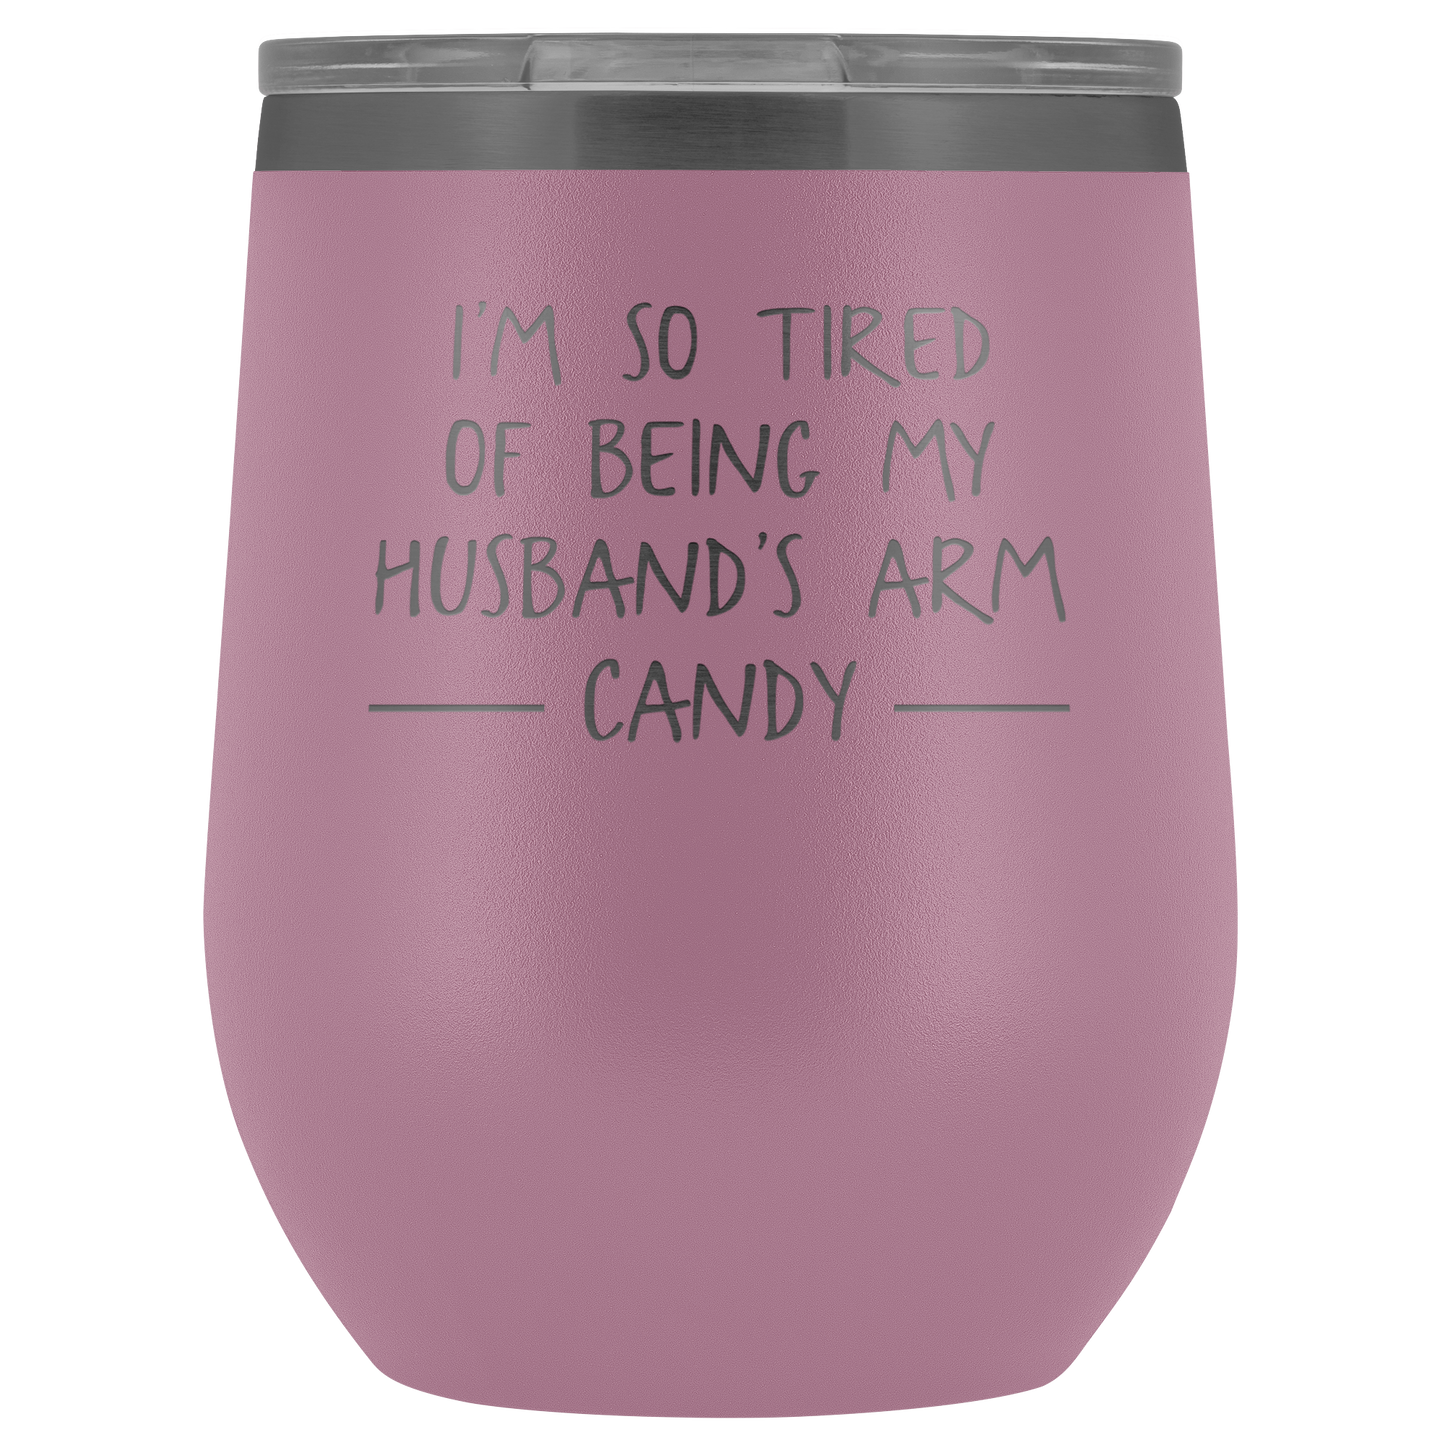 FUNNY ANNIVERSARY GIFT Idea for Girlfriend Gf Wine Tumbler from Boyfriend Gay Couple Mug Bf Cup Birthday Present for Her